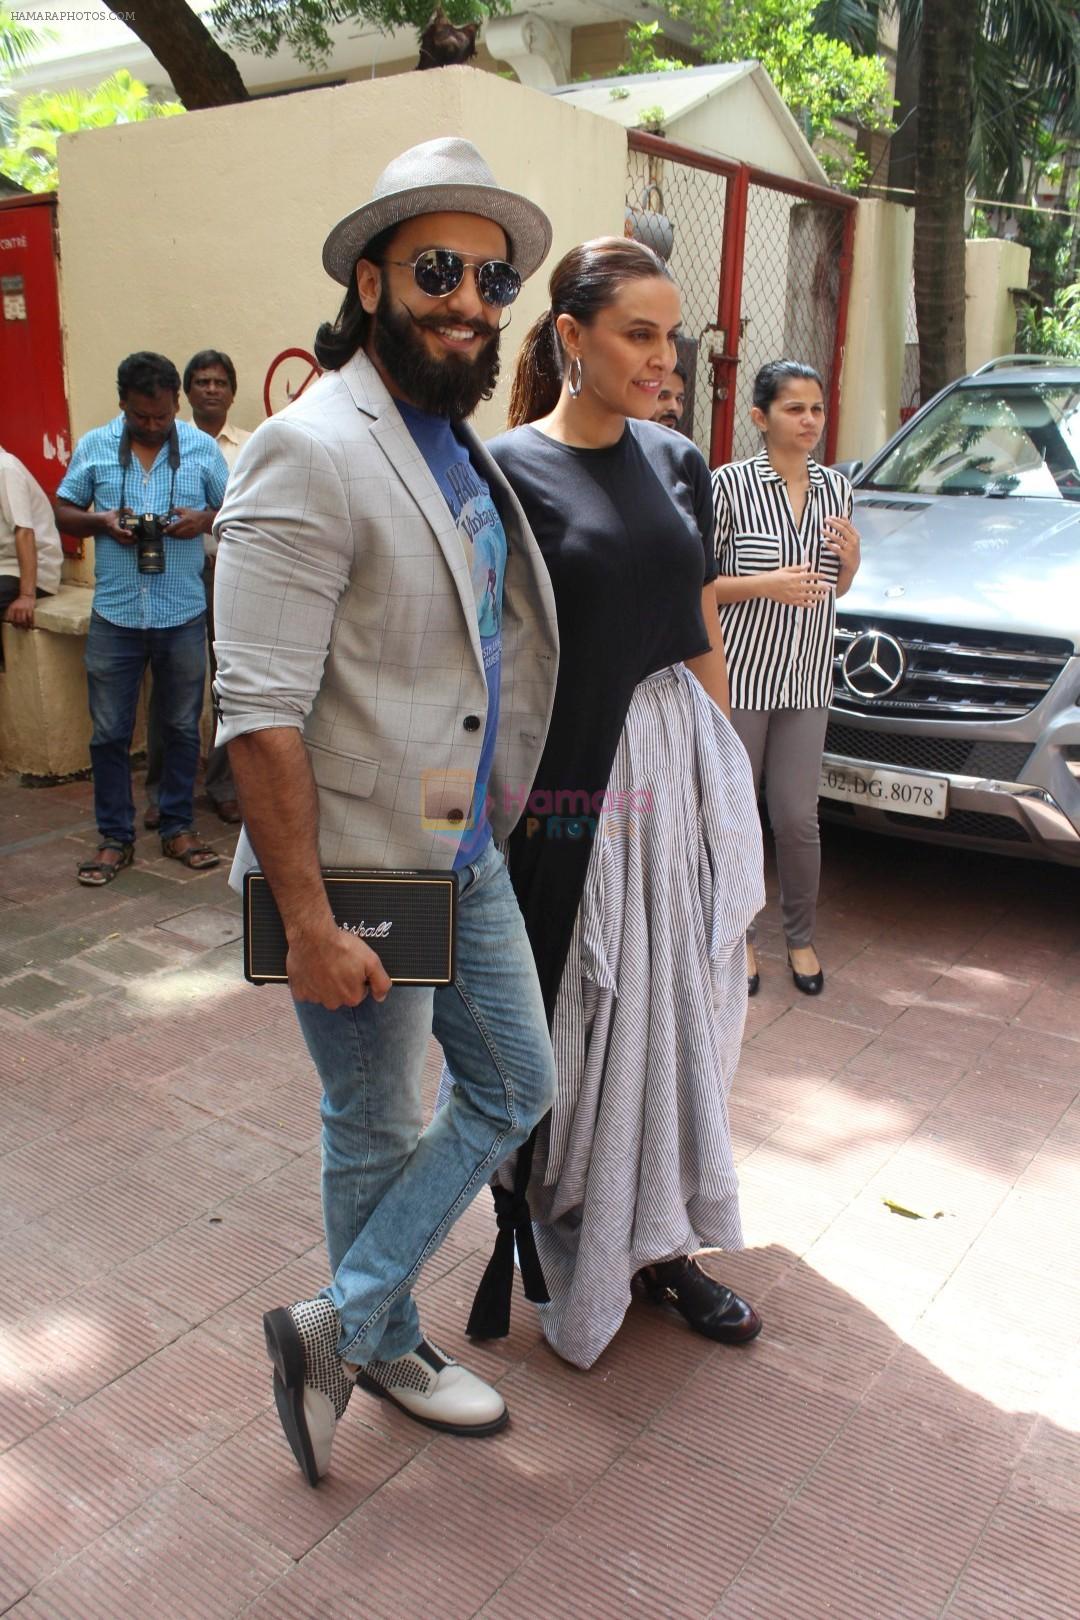 Ranveer Singh, Neha Dhupia Spotted before The Recording Of their Episode NoFilterNeha Season 2 on 10th July 2017